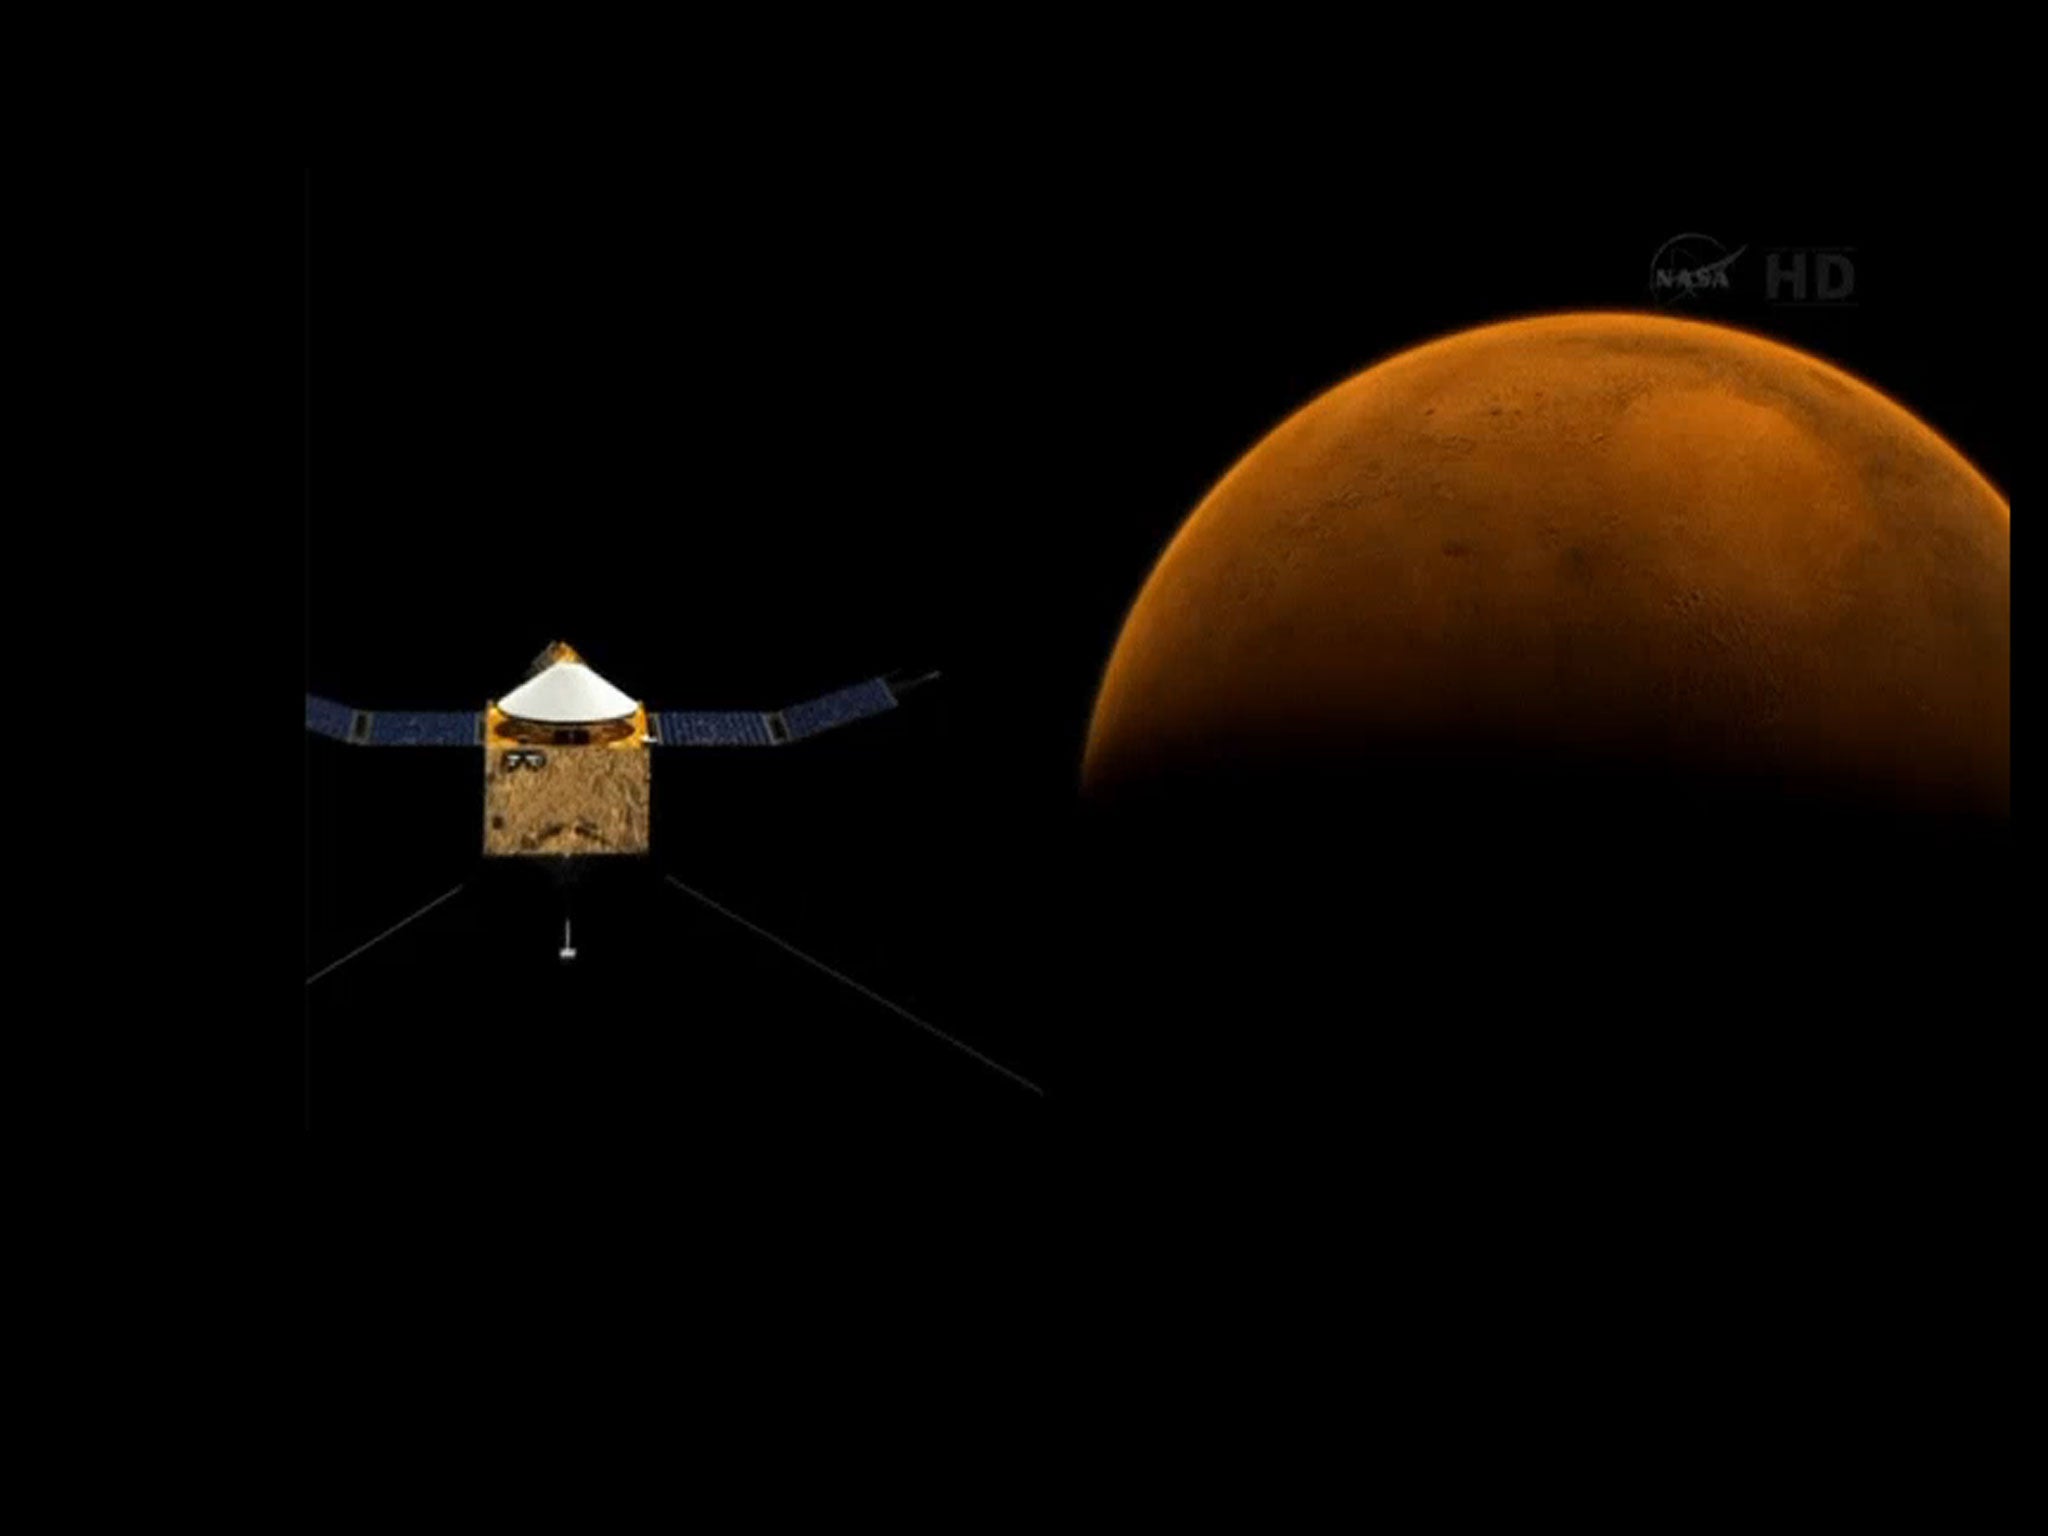 An image of what Maven would look like orbiting Mars